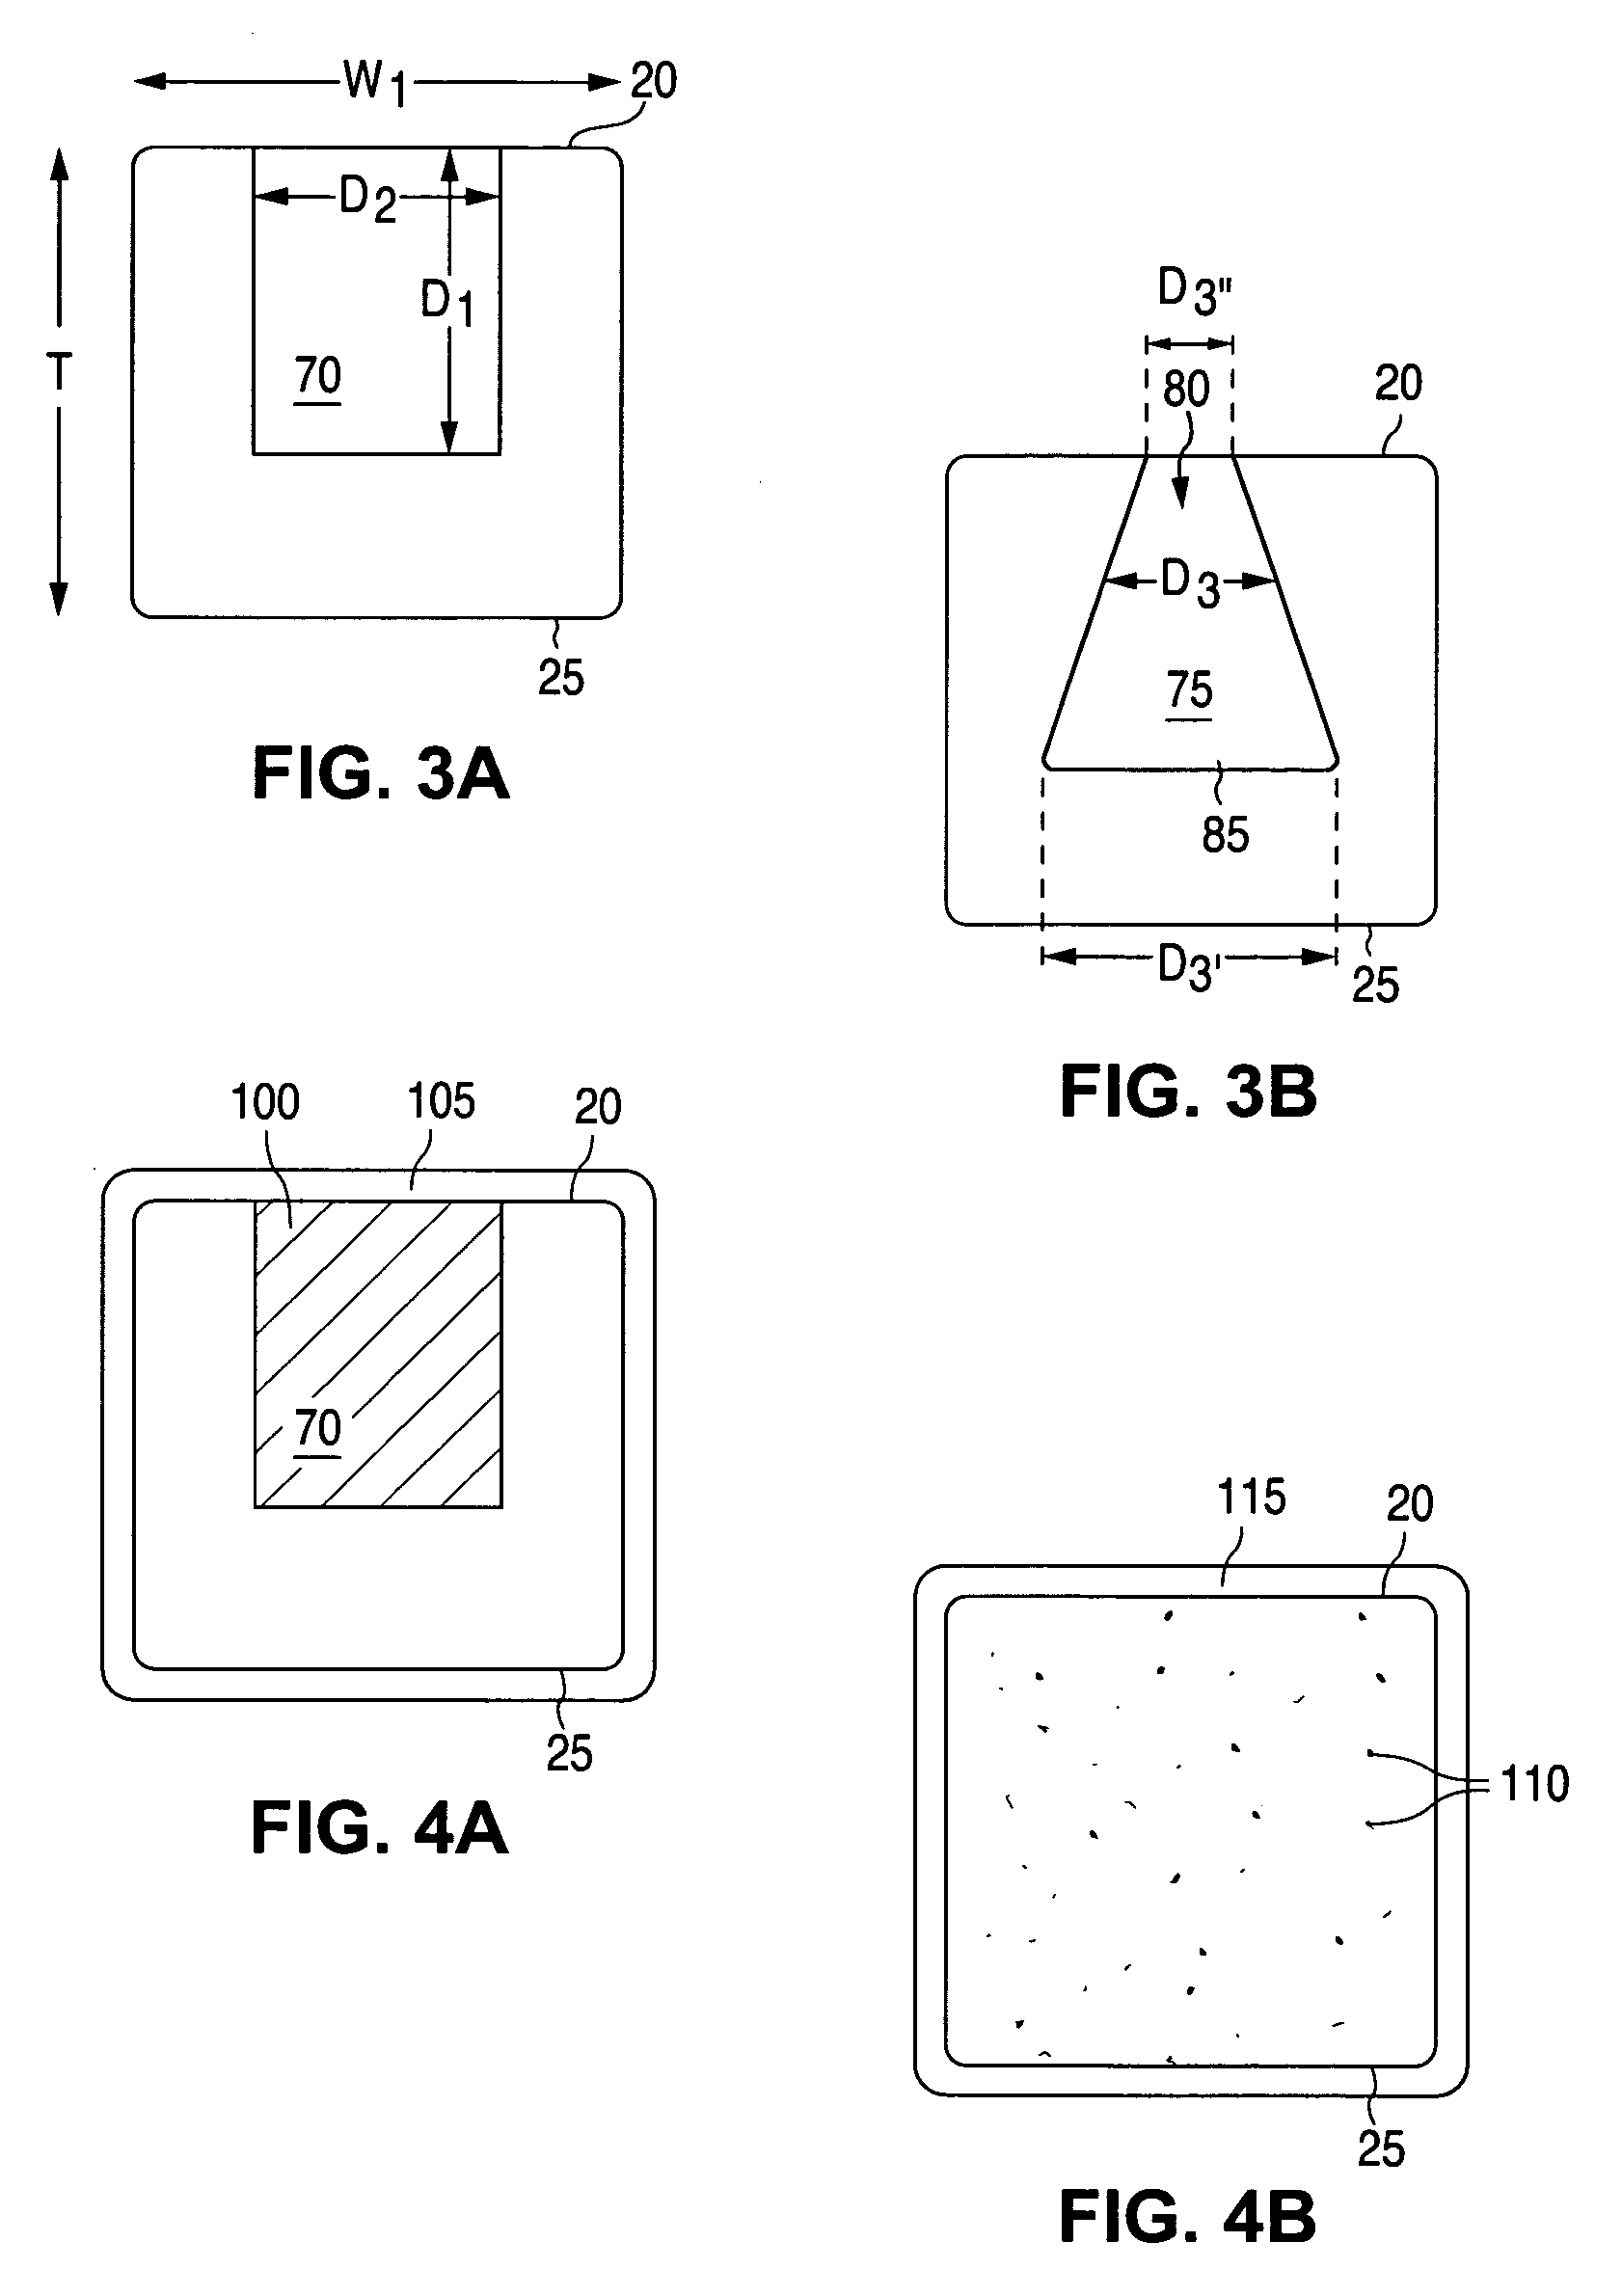 Anti-proliferative and anti-inflammatory agent combination for treatment of vascular disorders with an implantable medical device